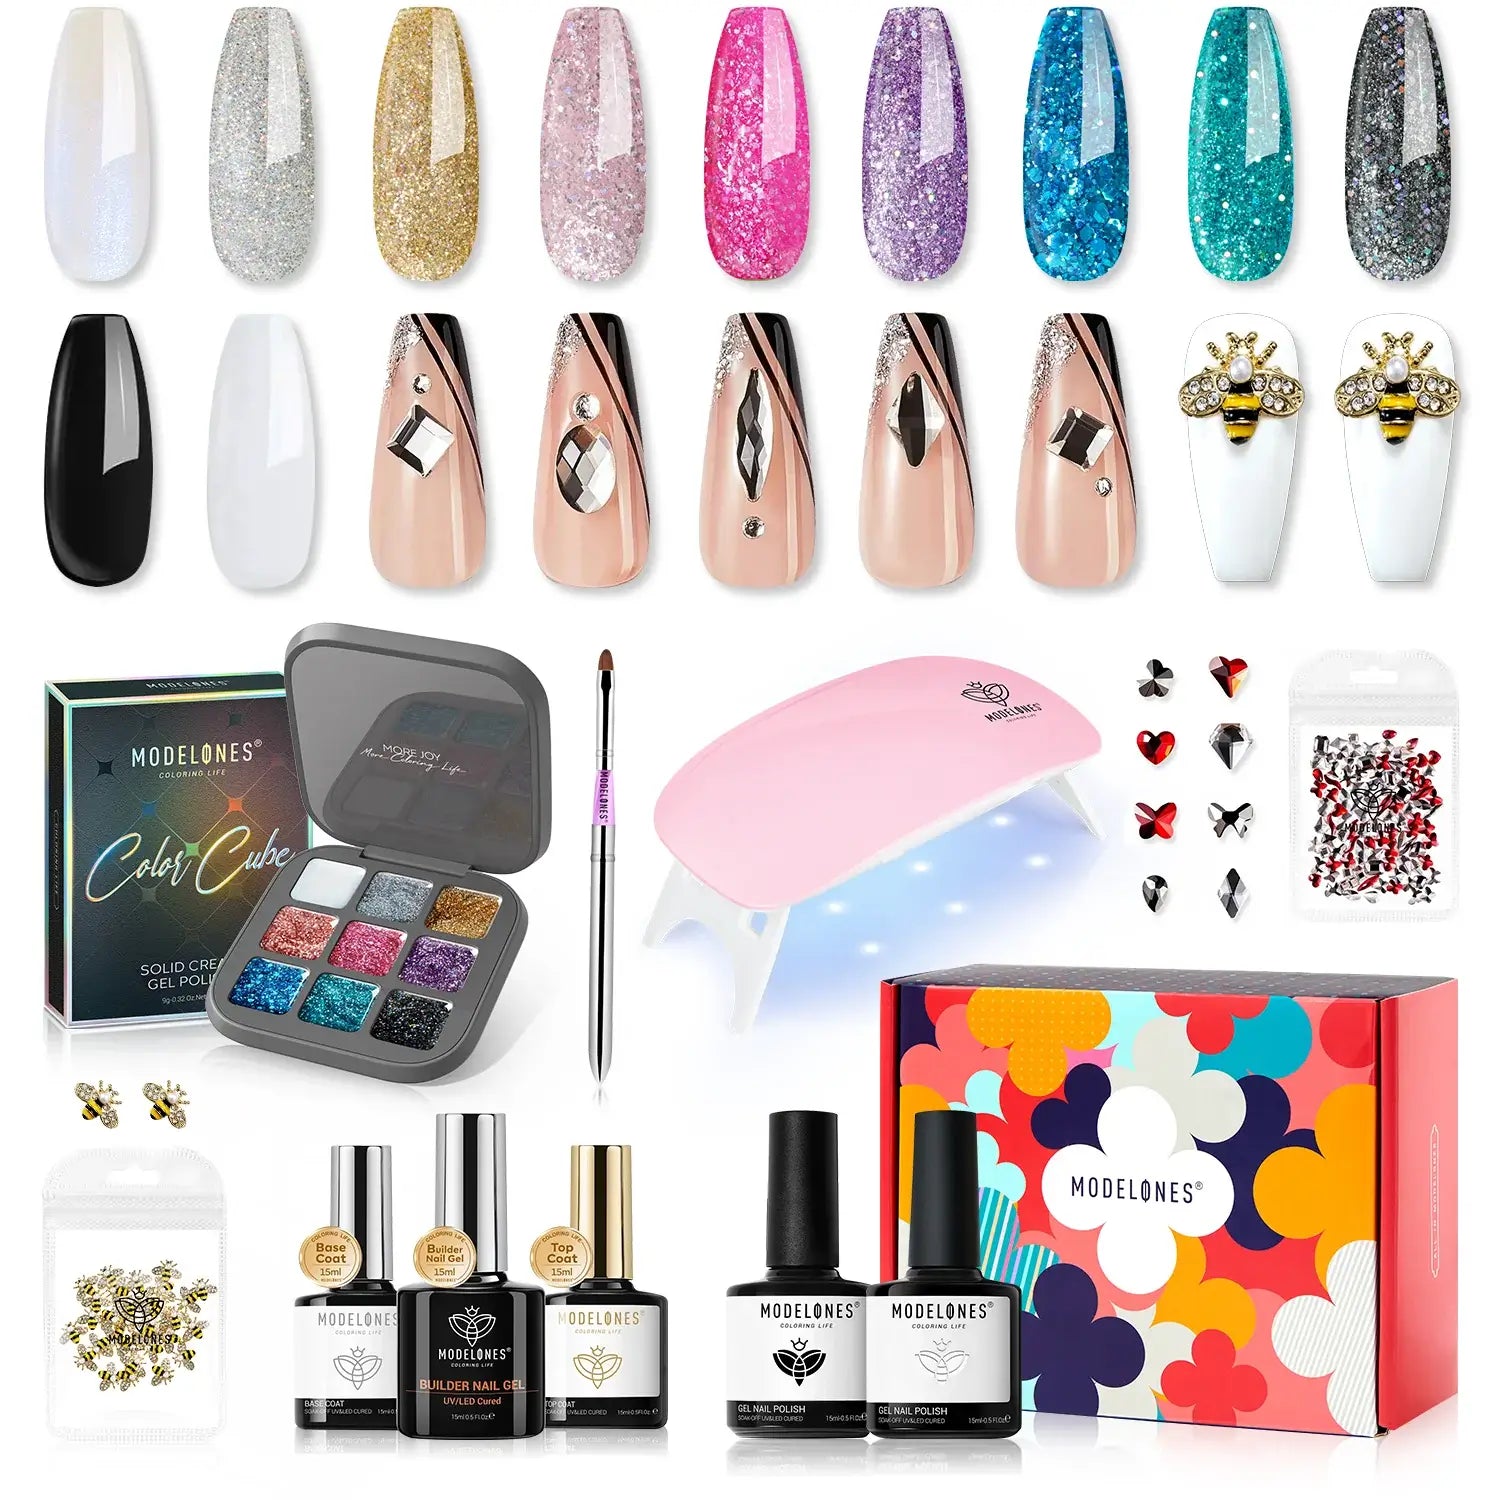 Celebration - All-In-One Gel Nail Polish Kit - Gift for Mother's Day【Free Nail Art Gloves】